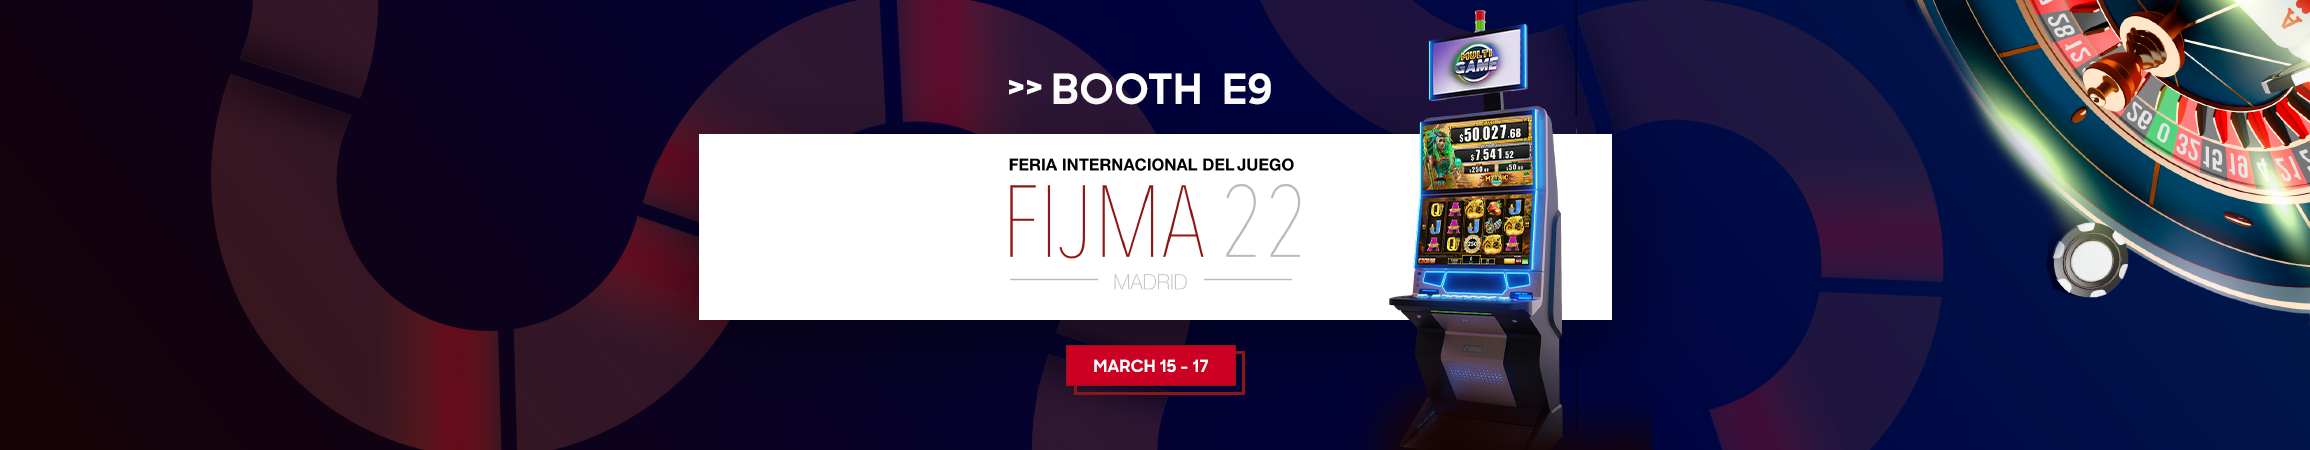 FBM brings new landbased and online gaming experiences to try at FIJMA 2022